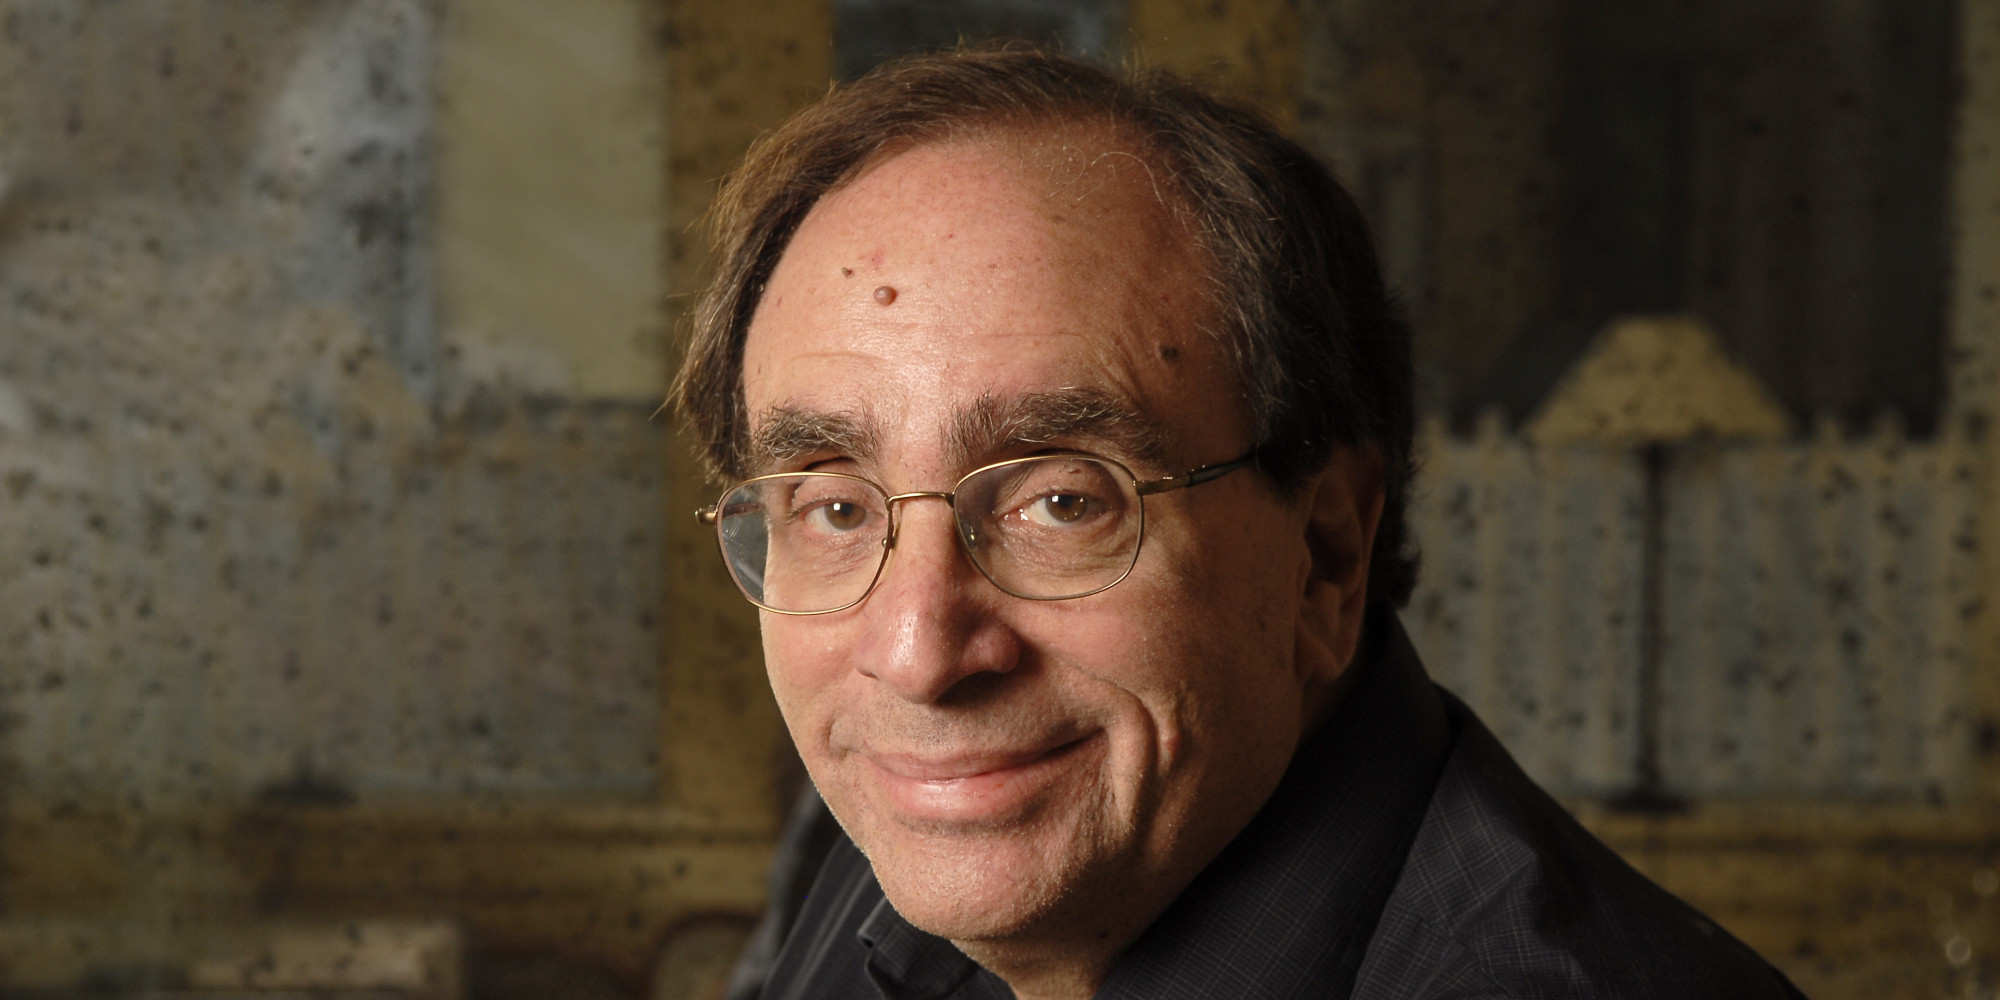 RL Stine at http://www.huffingtonpost.com/james-preller-/how-i-survived-a-night-in_b_4181105.html